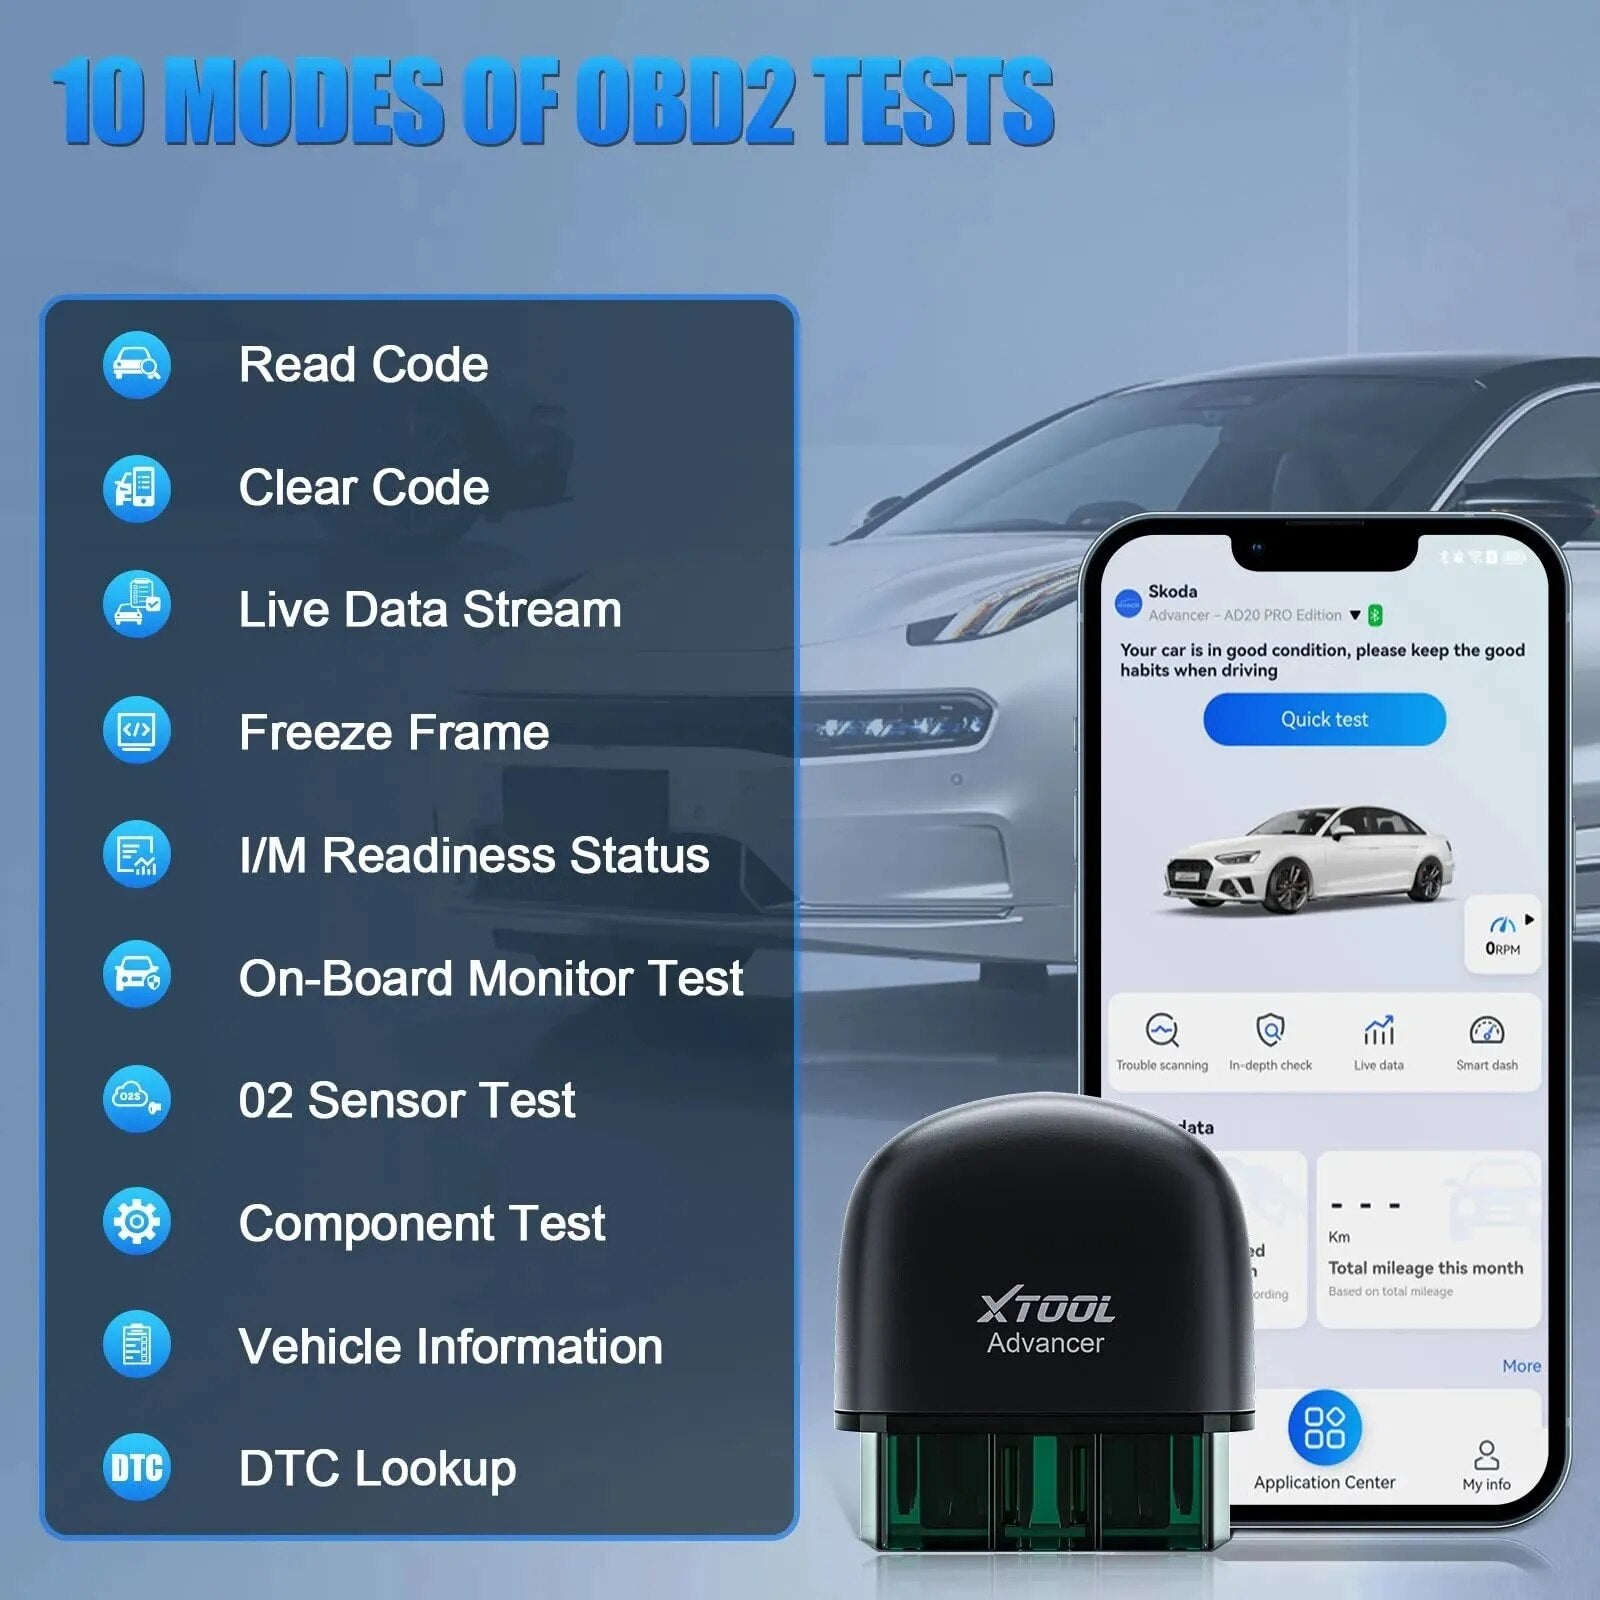 XTOOL AD20 Advancer OBD2 Code Reader Scanner Car Engine Diagnostic Tools Full obd Function Android /IOS Upgrade Of ELM327 AD10